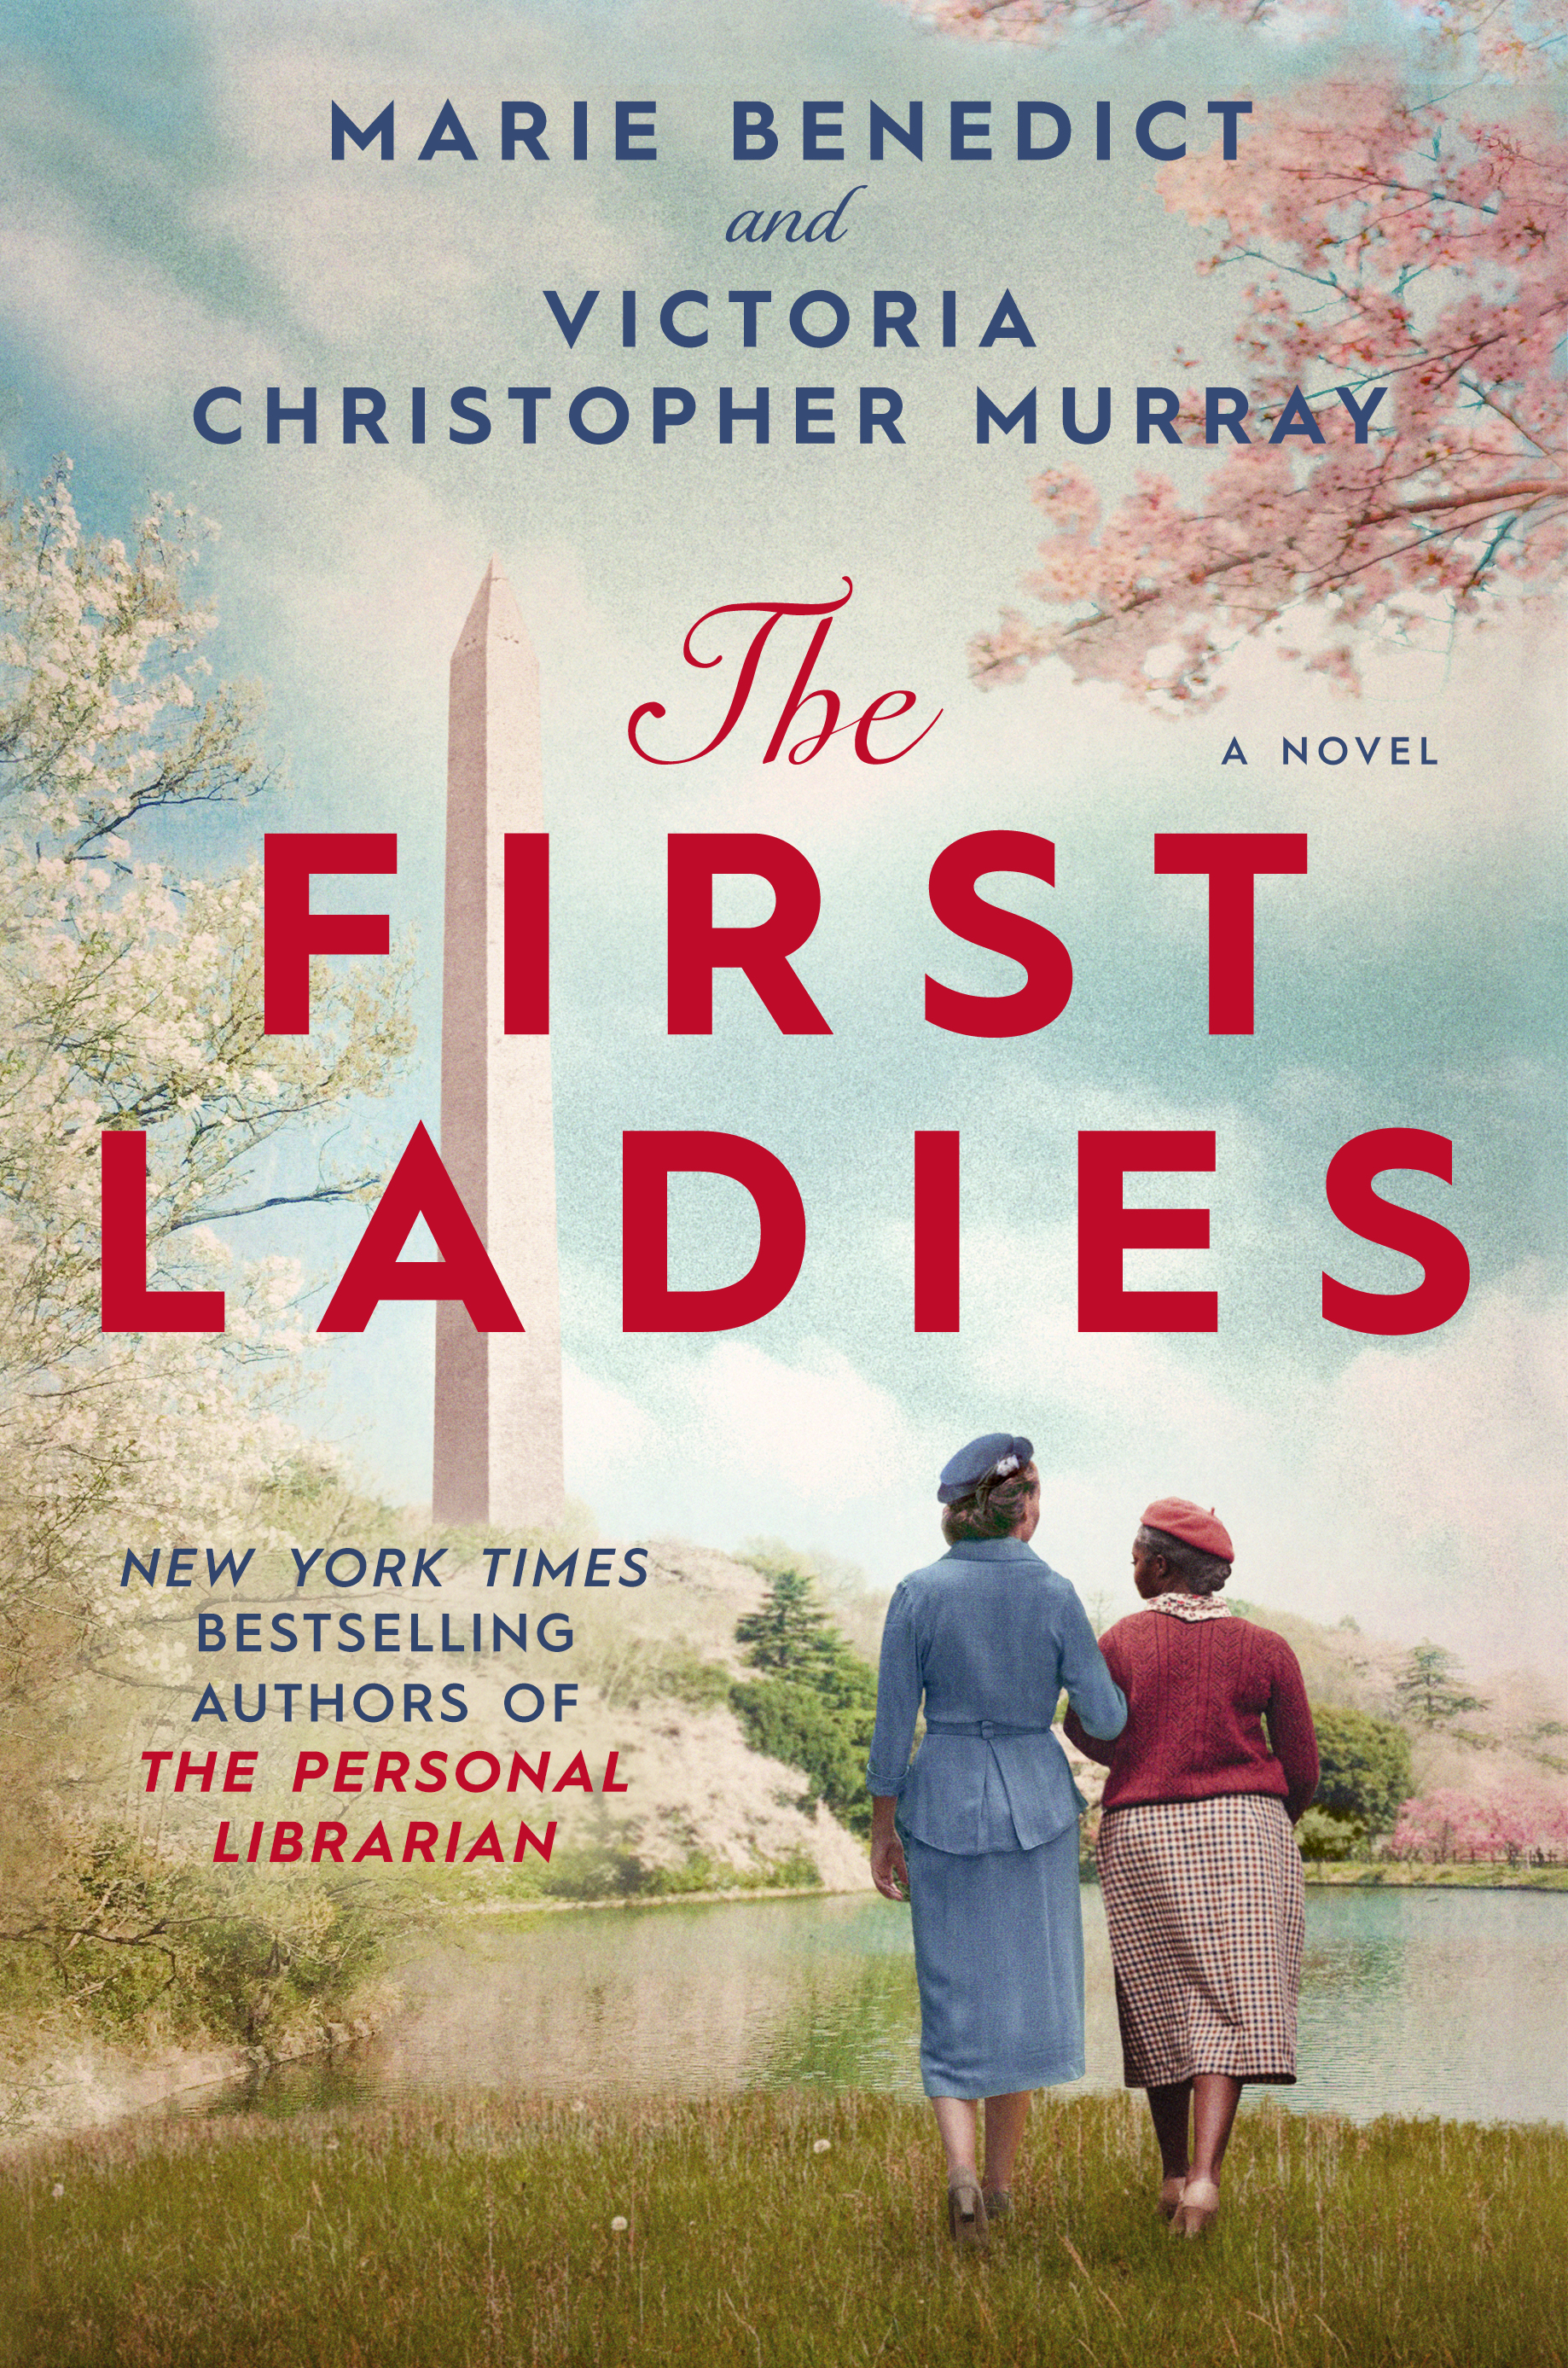 Cover of the book the First Ladies, featuring the title and two women walking together